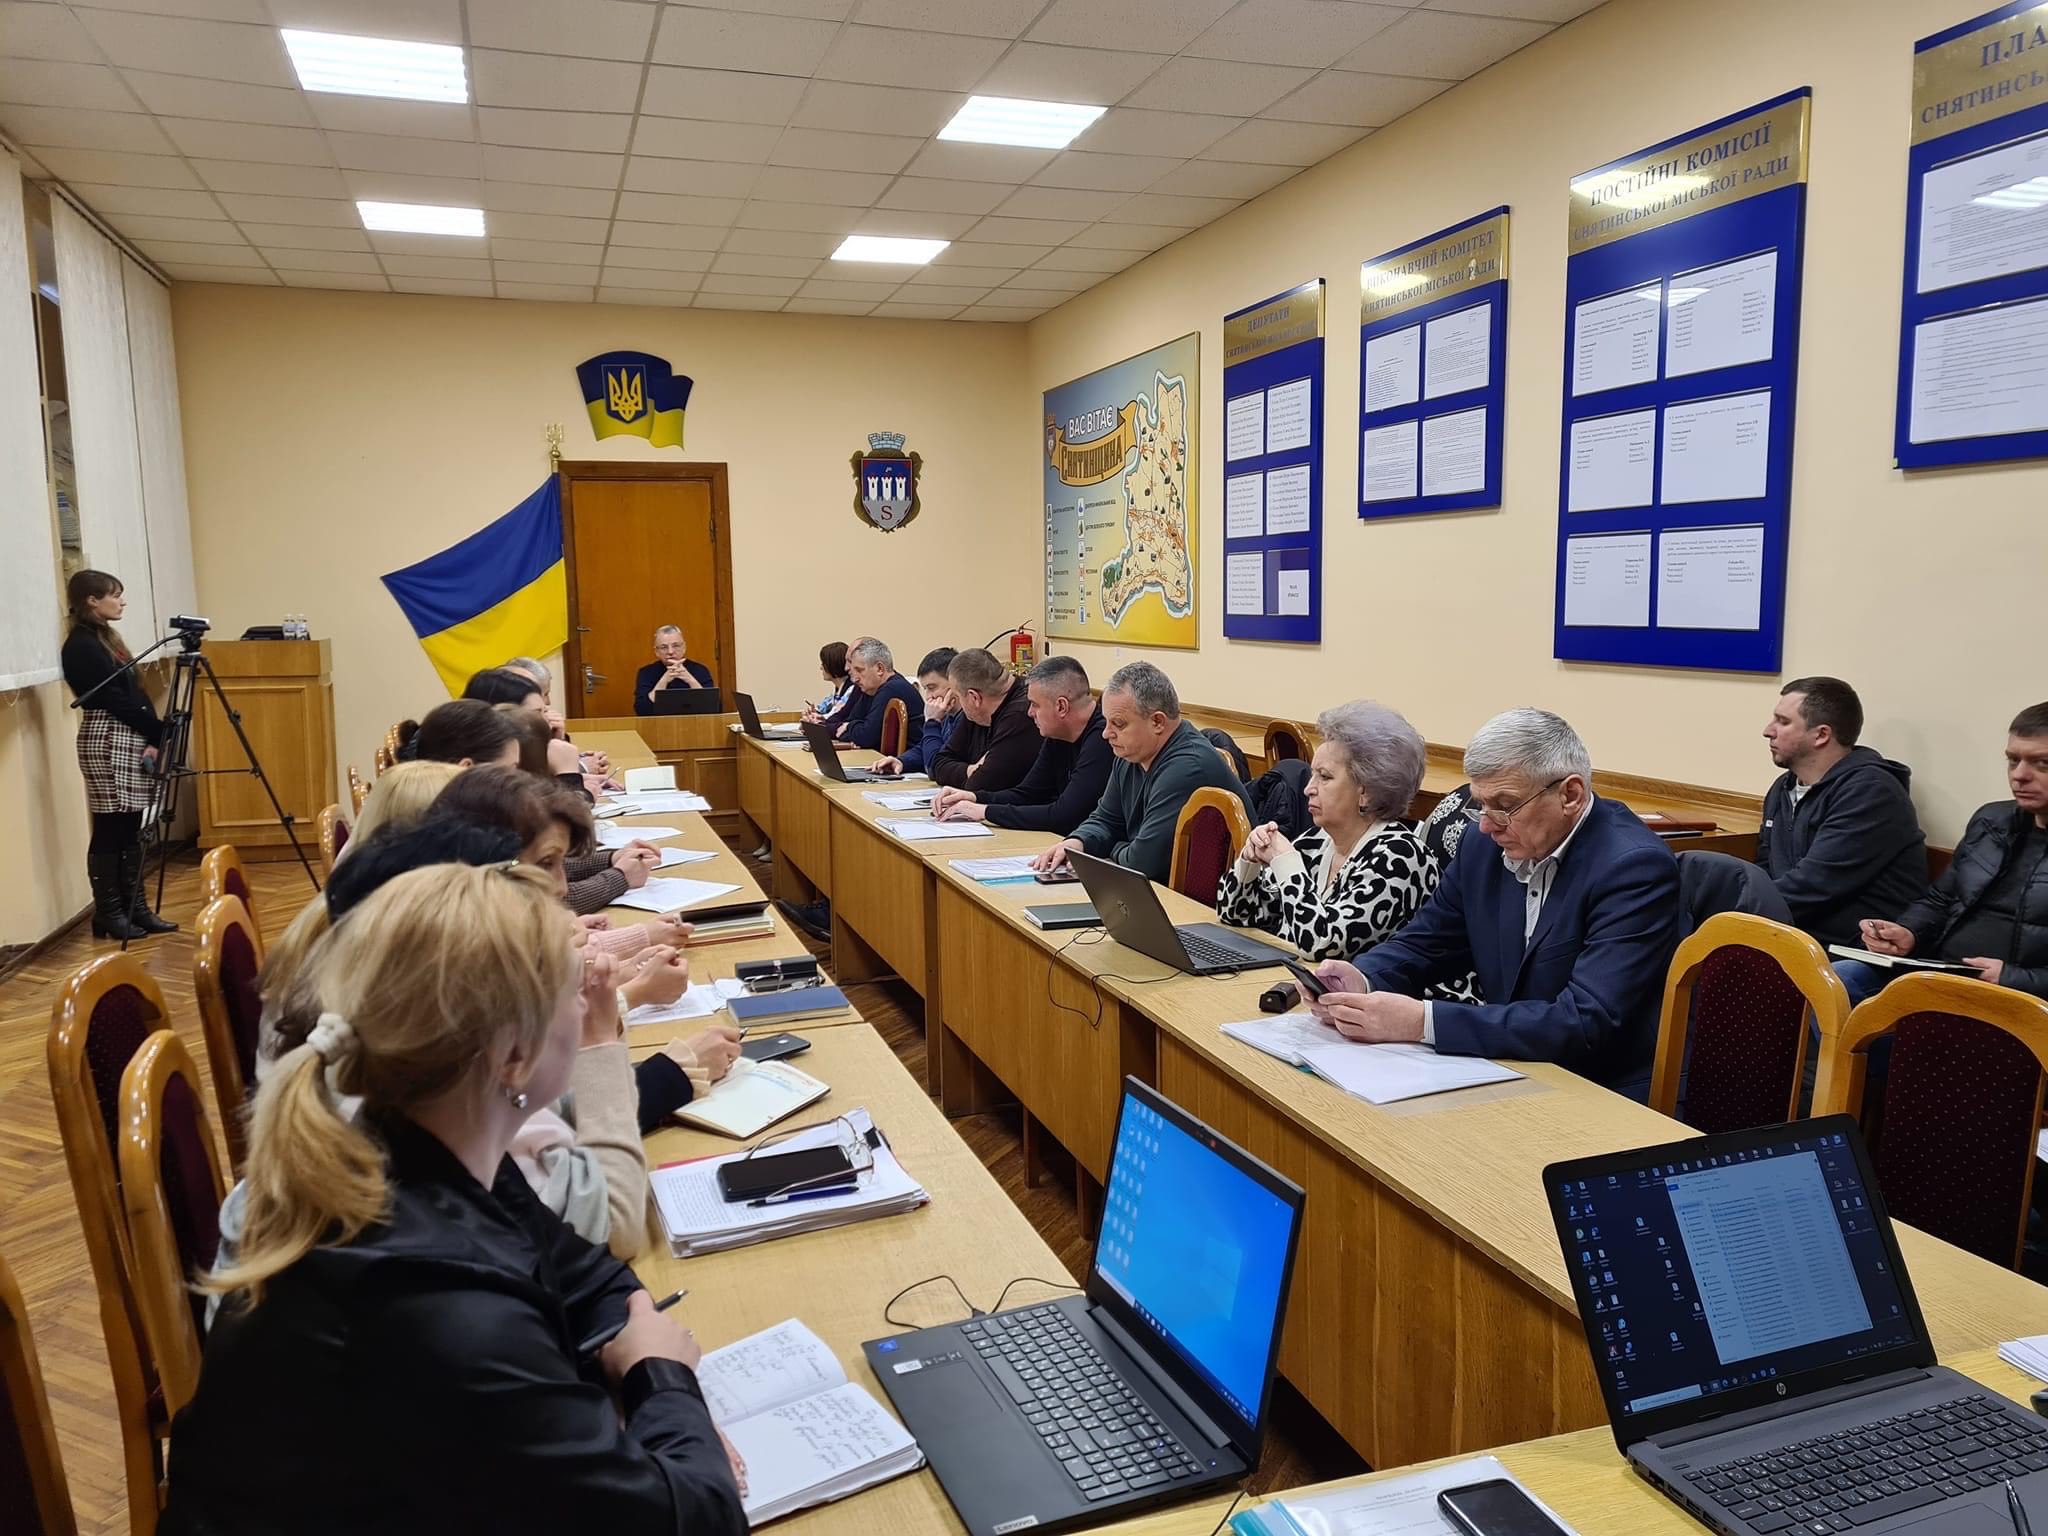 Meeting of the Executive Committee of the Sniatyn Town Council